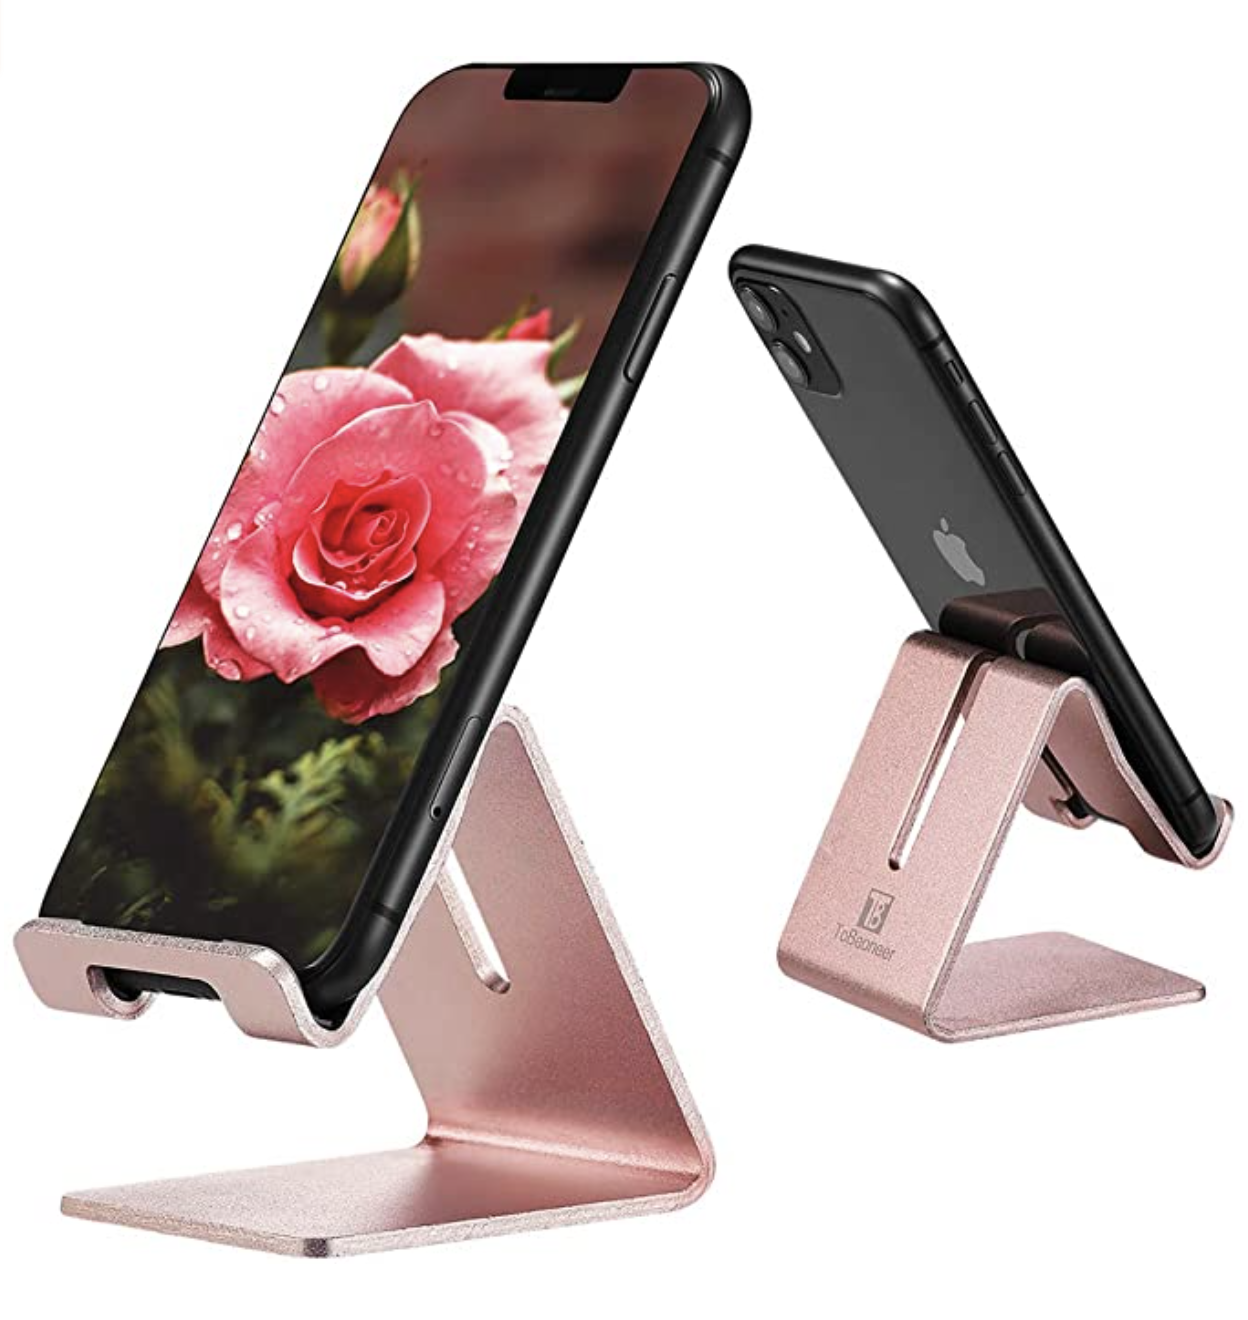 Home office essentials - cell phone stand